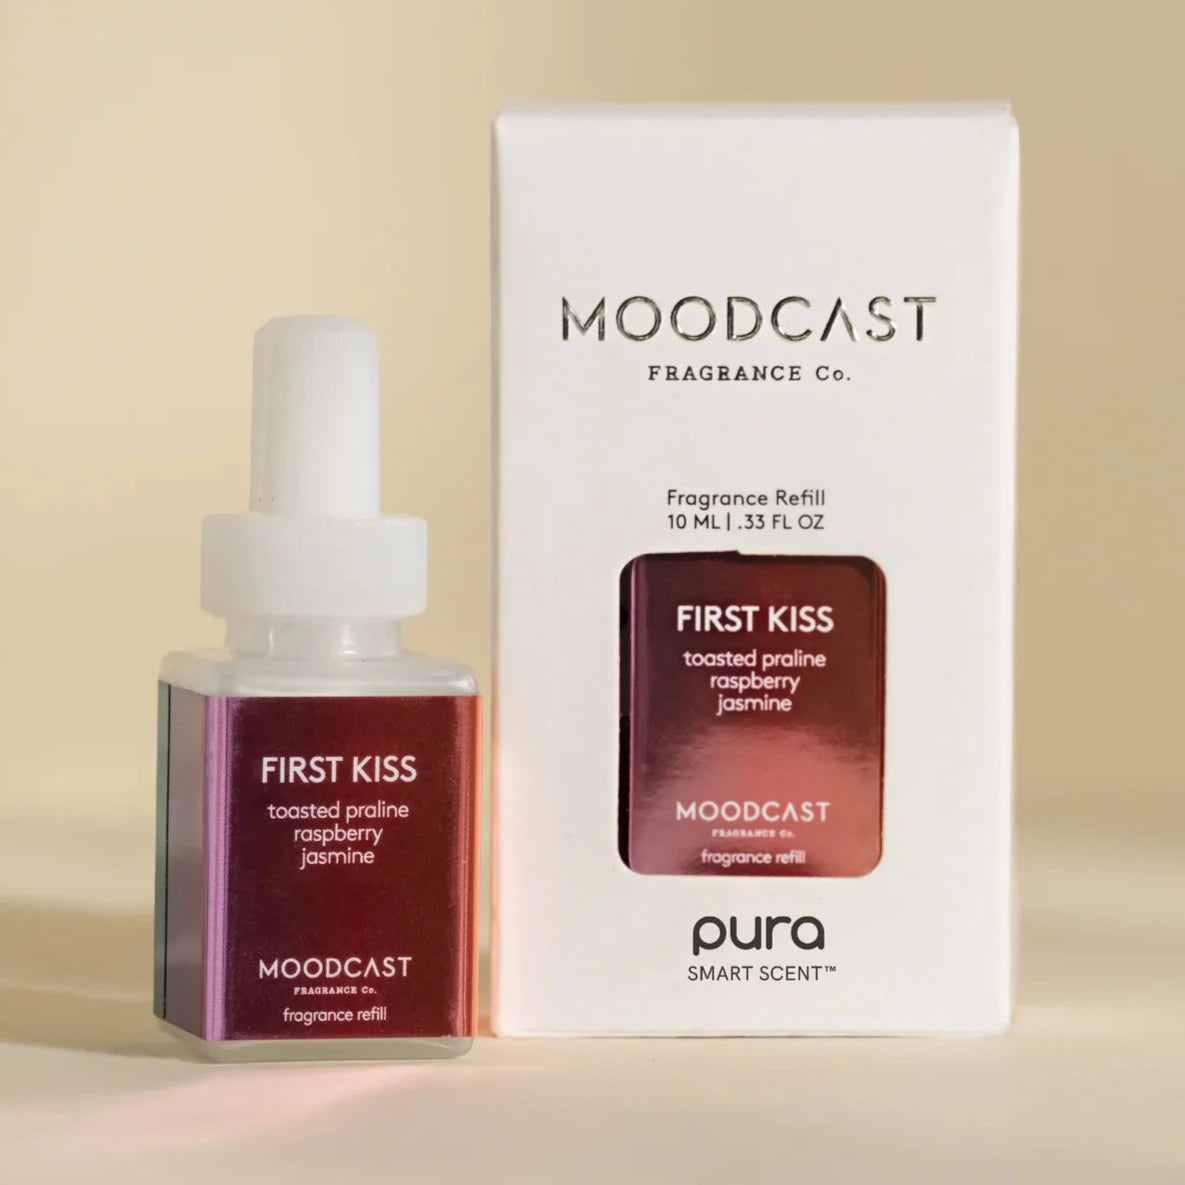 First Kiss by Moodcast Pura Fragrance Refill - The Preppy Bunny